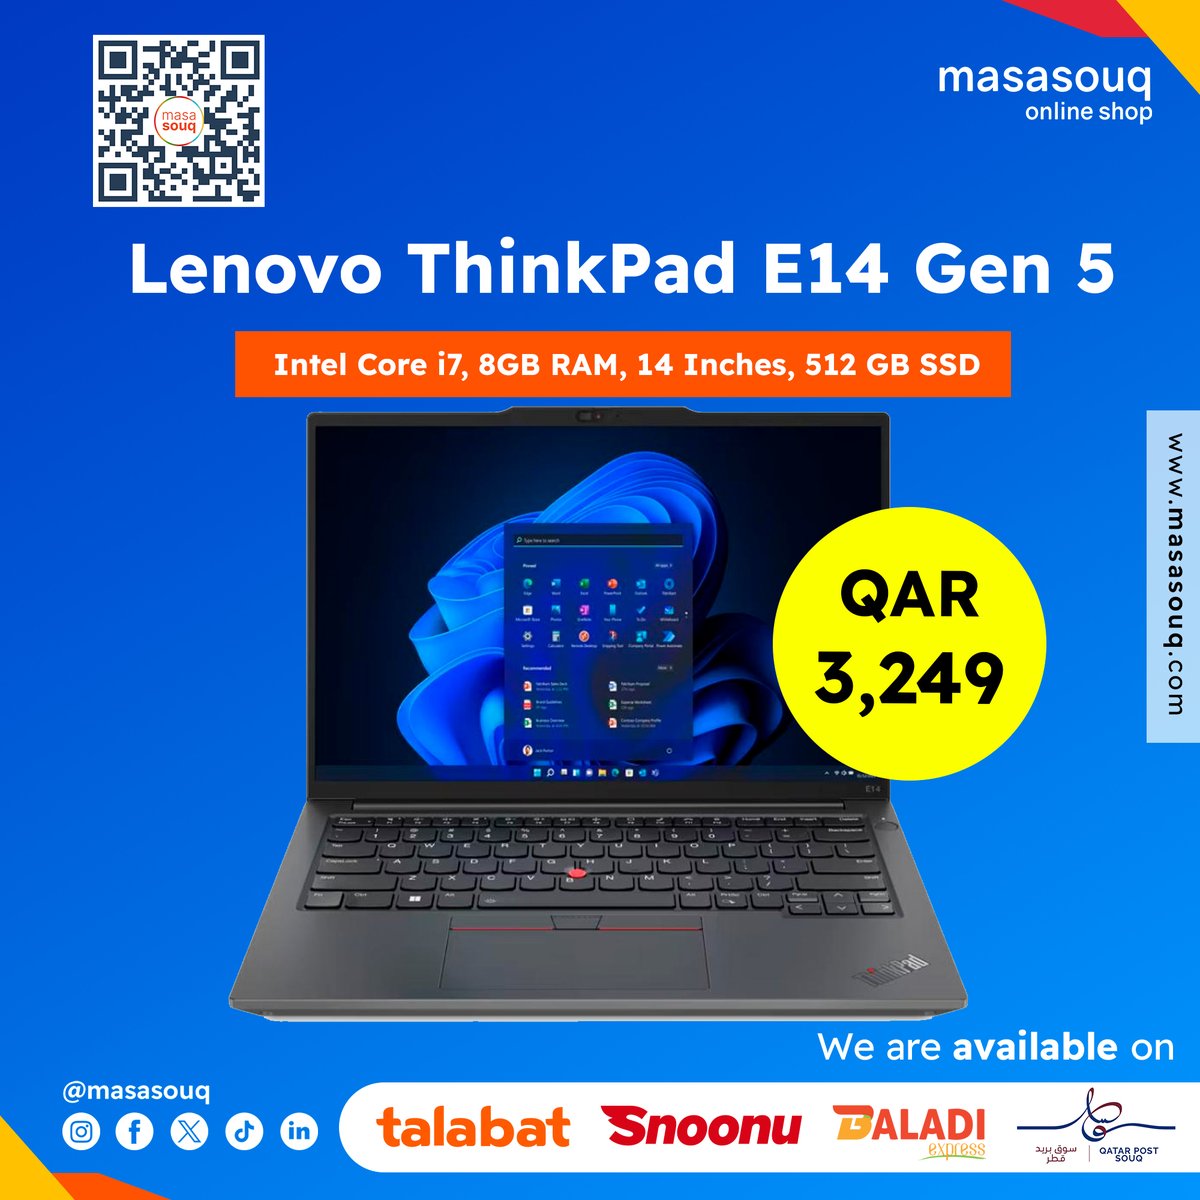 💻 Upgrade your workflow! Get the powerful Lenovo ThinkPad E14 Gen 5 with Intel Core i7, 8GB RAM, 512GB SSD for only QAR 3,249.  Perfect for on-the-go productivity. 💼

👉Order Now: masasouq.com/lenovo-thinkpa…

#LenovoThinkPad #Laptop #Productivity #Tech #Qatar #Masasouq